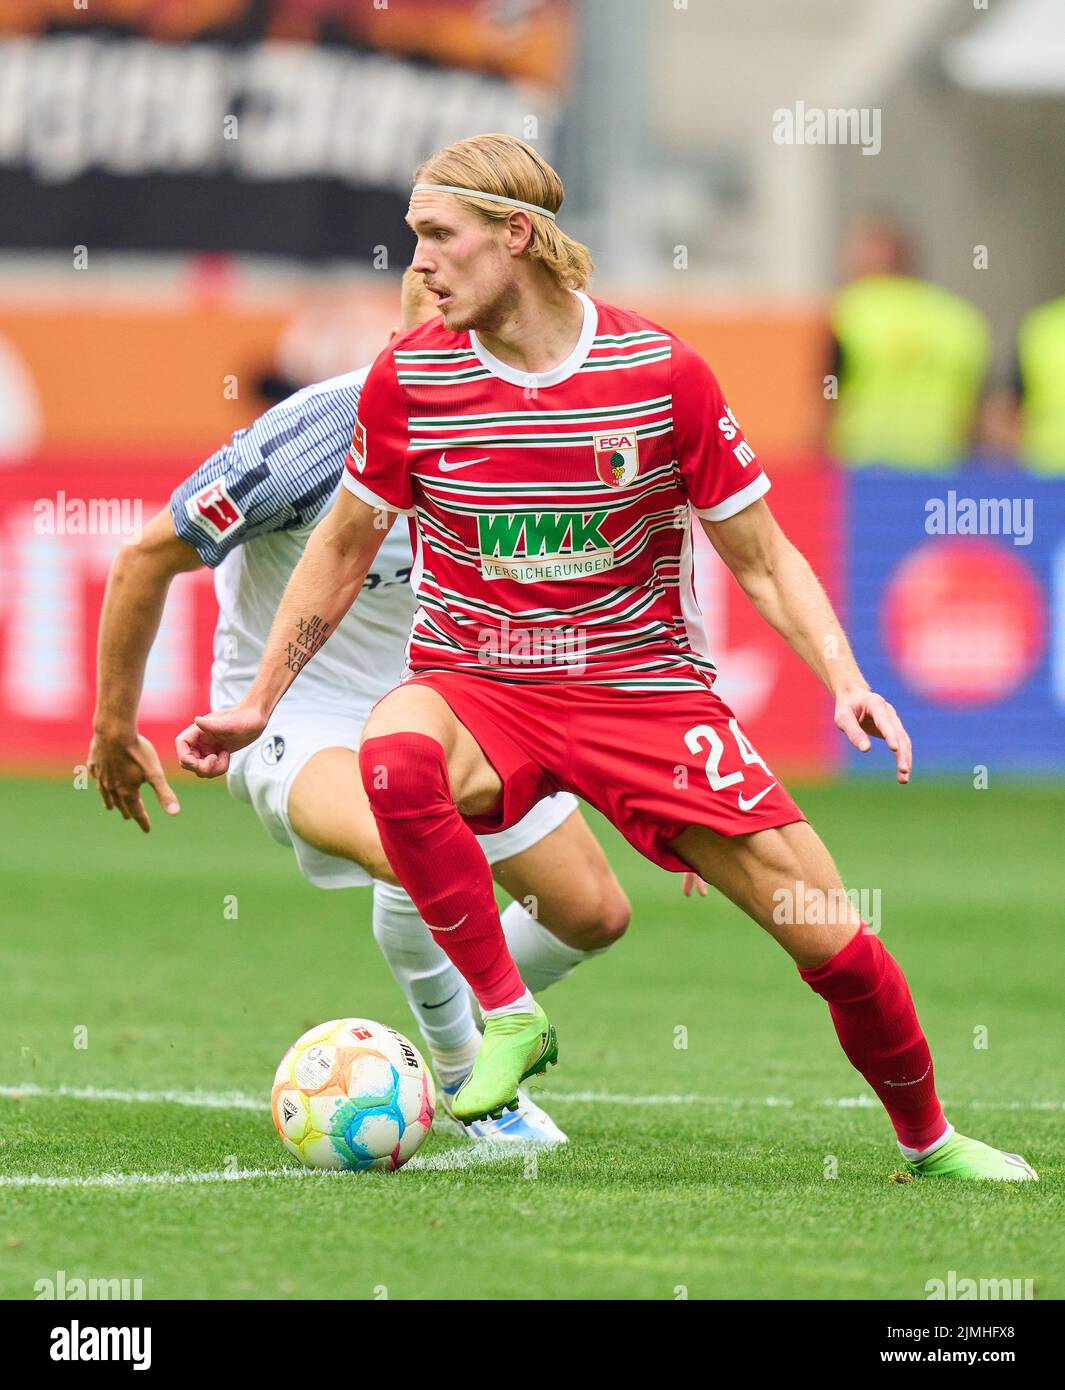 Hans Fredrik JENSEN FCA 24  in the match FC AUGSBURG - SC FREIBURG 0-4 1.German Football League on Aug 06, 2022 in Augsburg, Germany. Season 2022/2023, matchday 1, 1.Bundesliga, FCB, Munich, 1.Spieltag © Peter Schatz / Alamy Live News    - DFL REGULATIONS PROHIBIT ANY USE OF PHOTOGRAPHS as IMAGE SEQUENCES and/or QUASI-VIDEO - Stock Photo